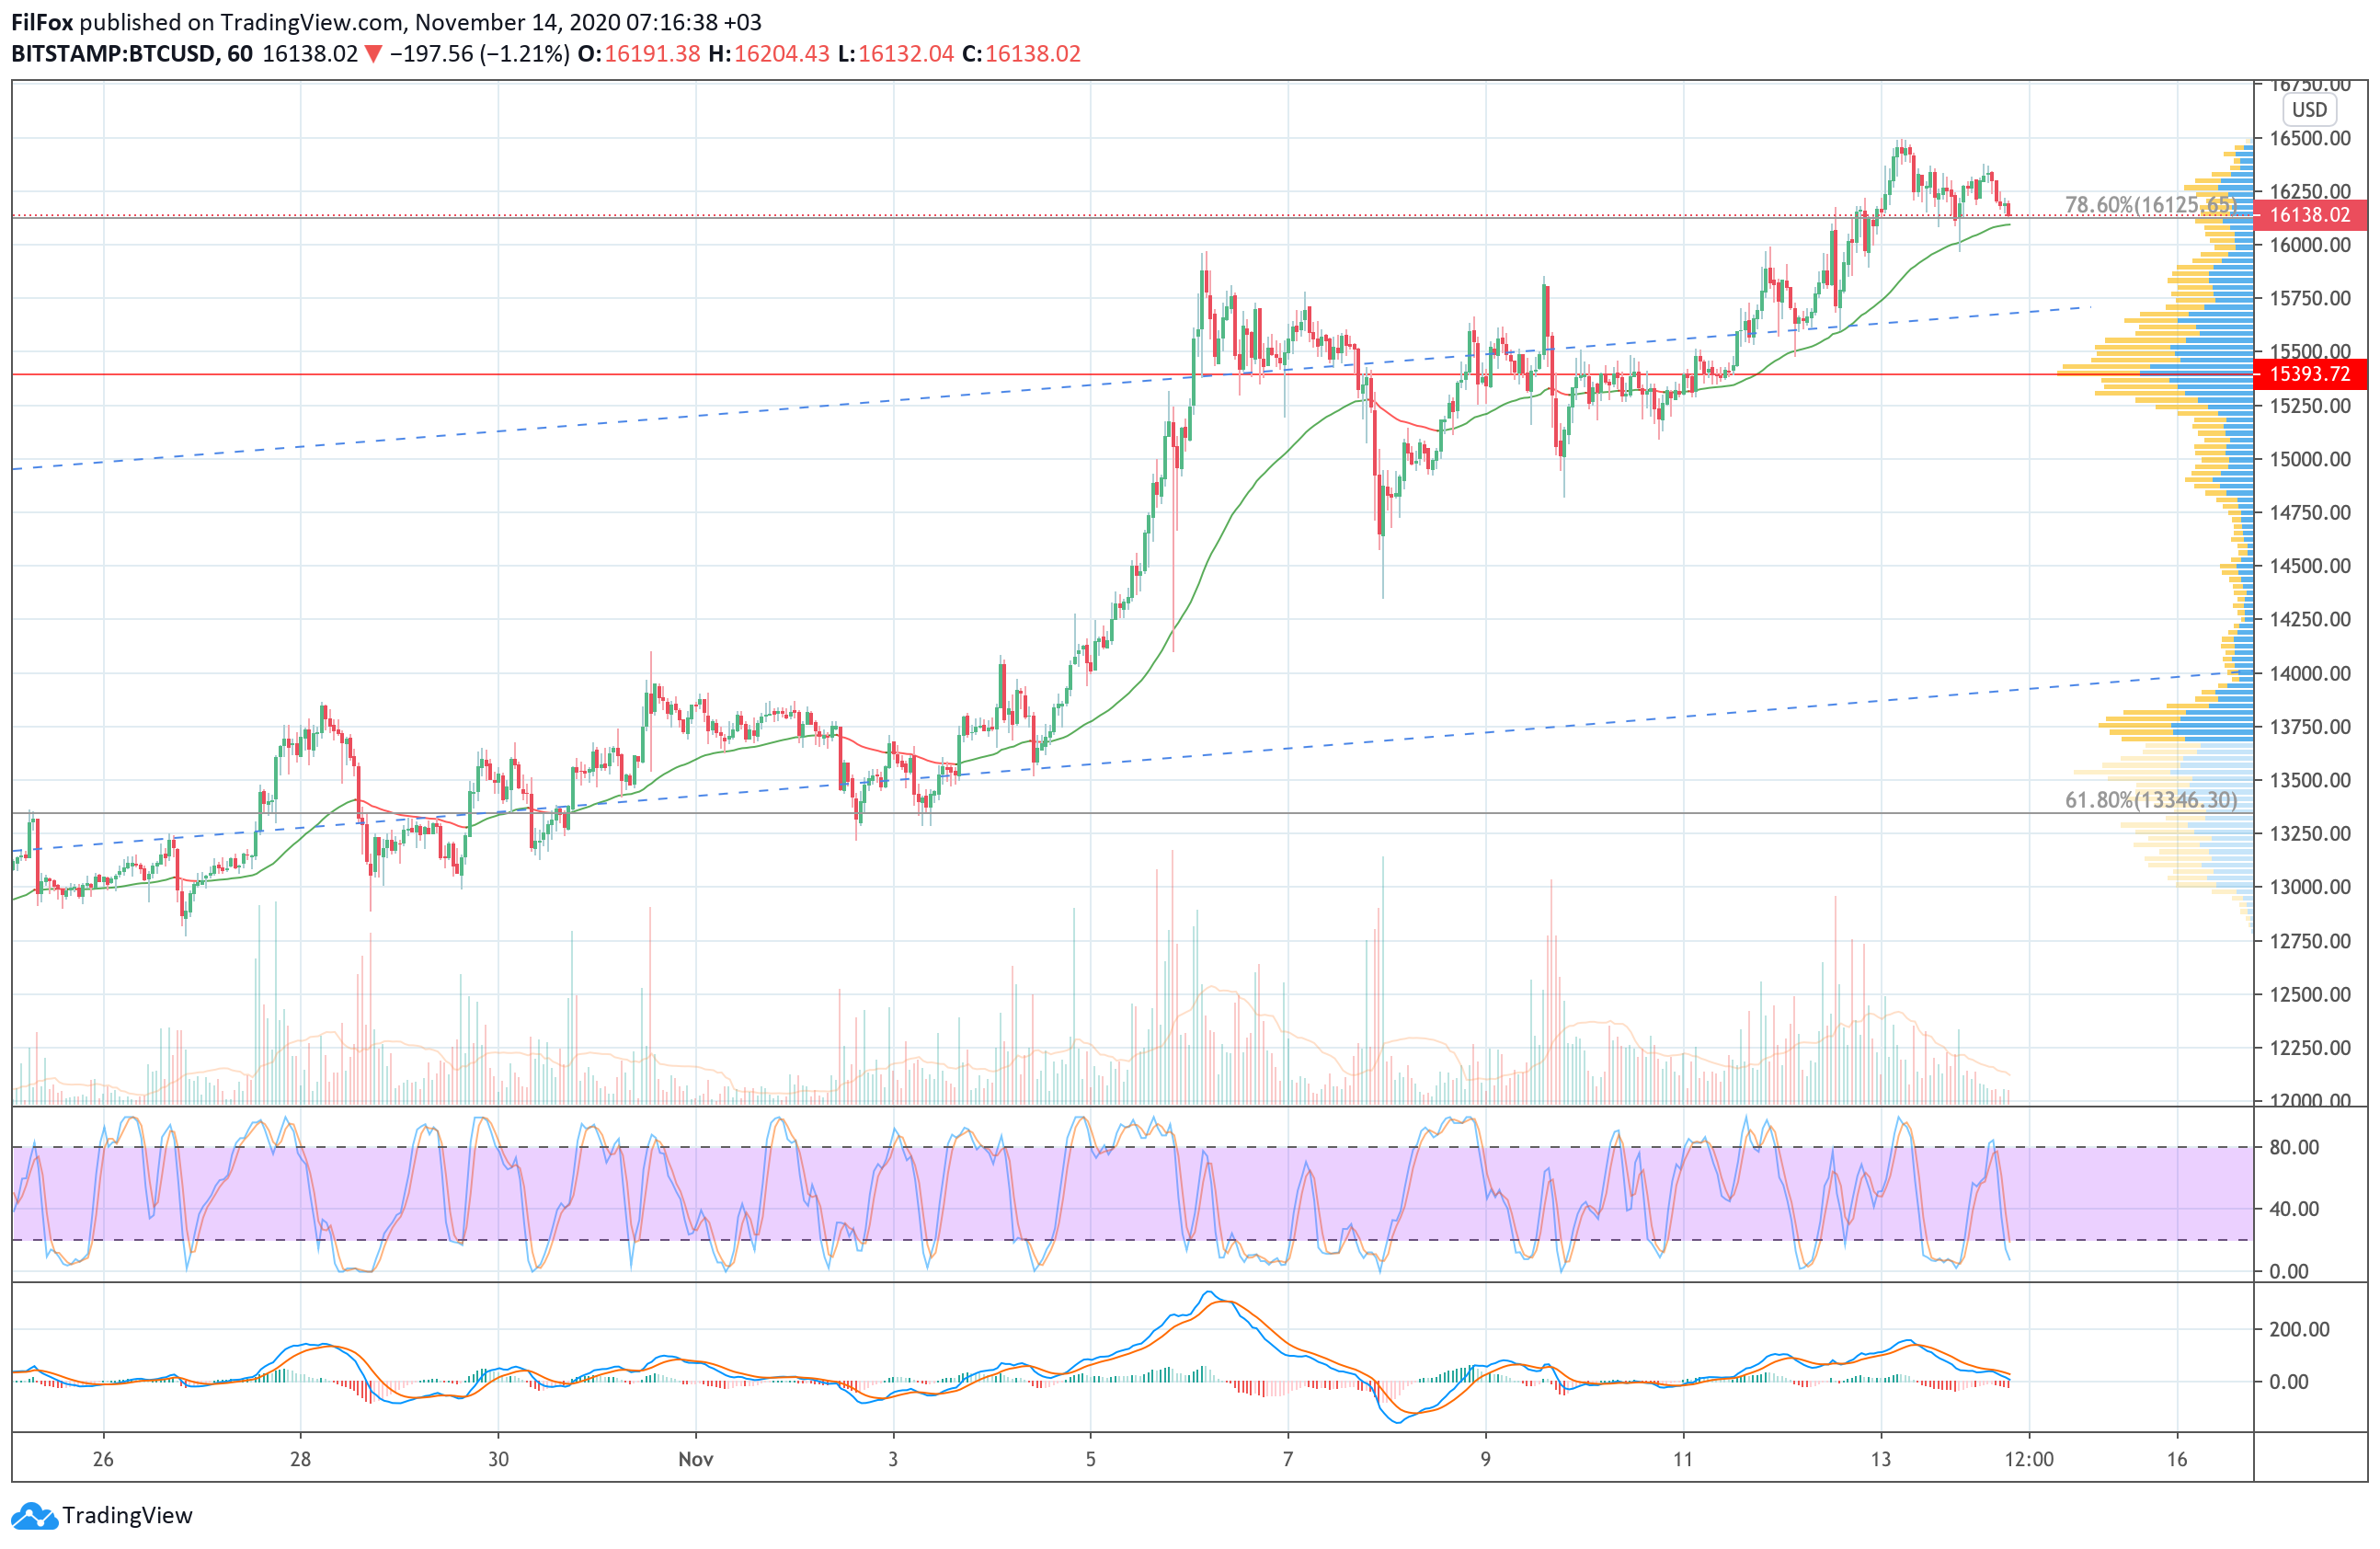 Analysis of the prices of Bitcoin, Ethereum, Ripple for 11/14/2020